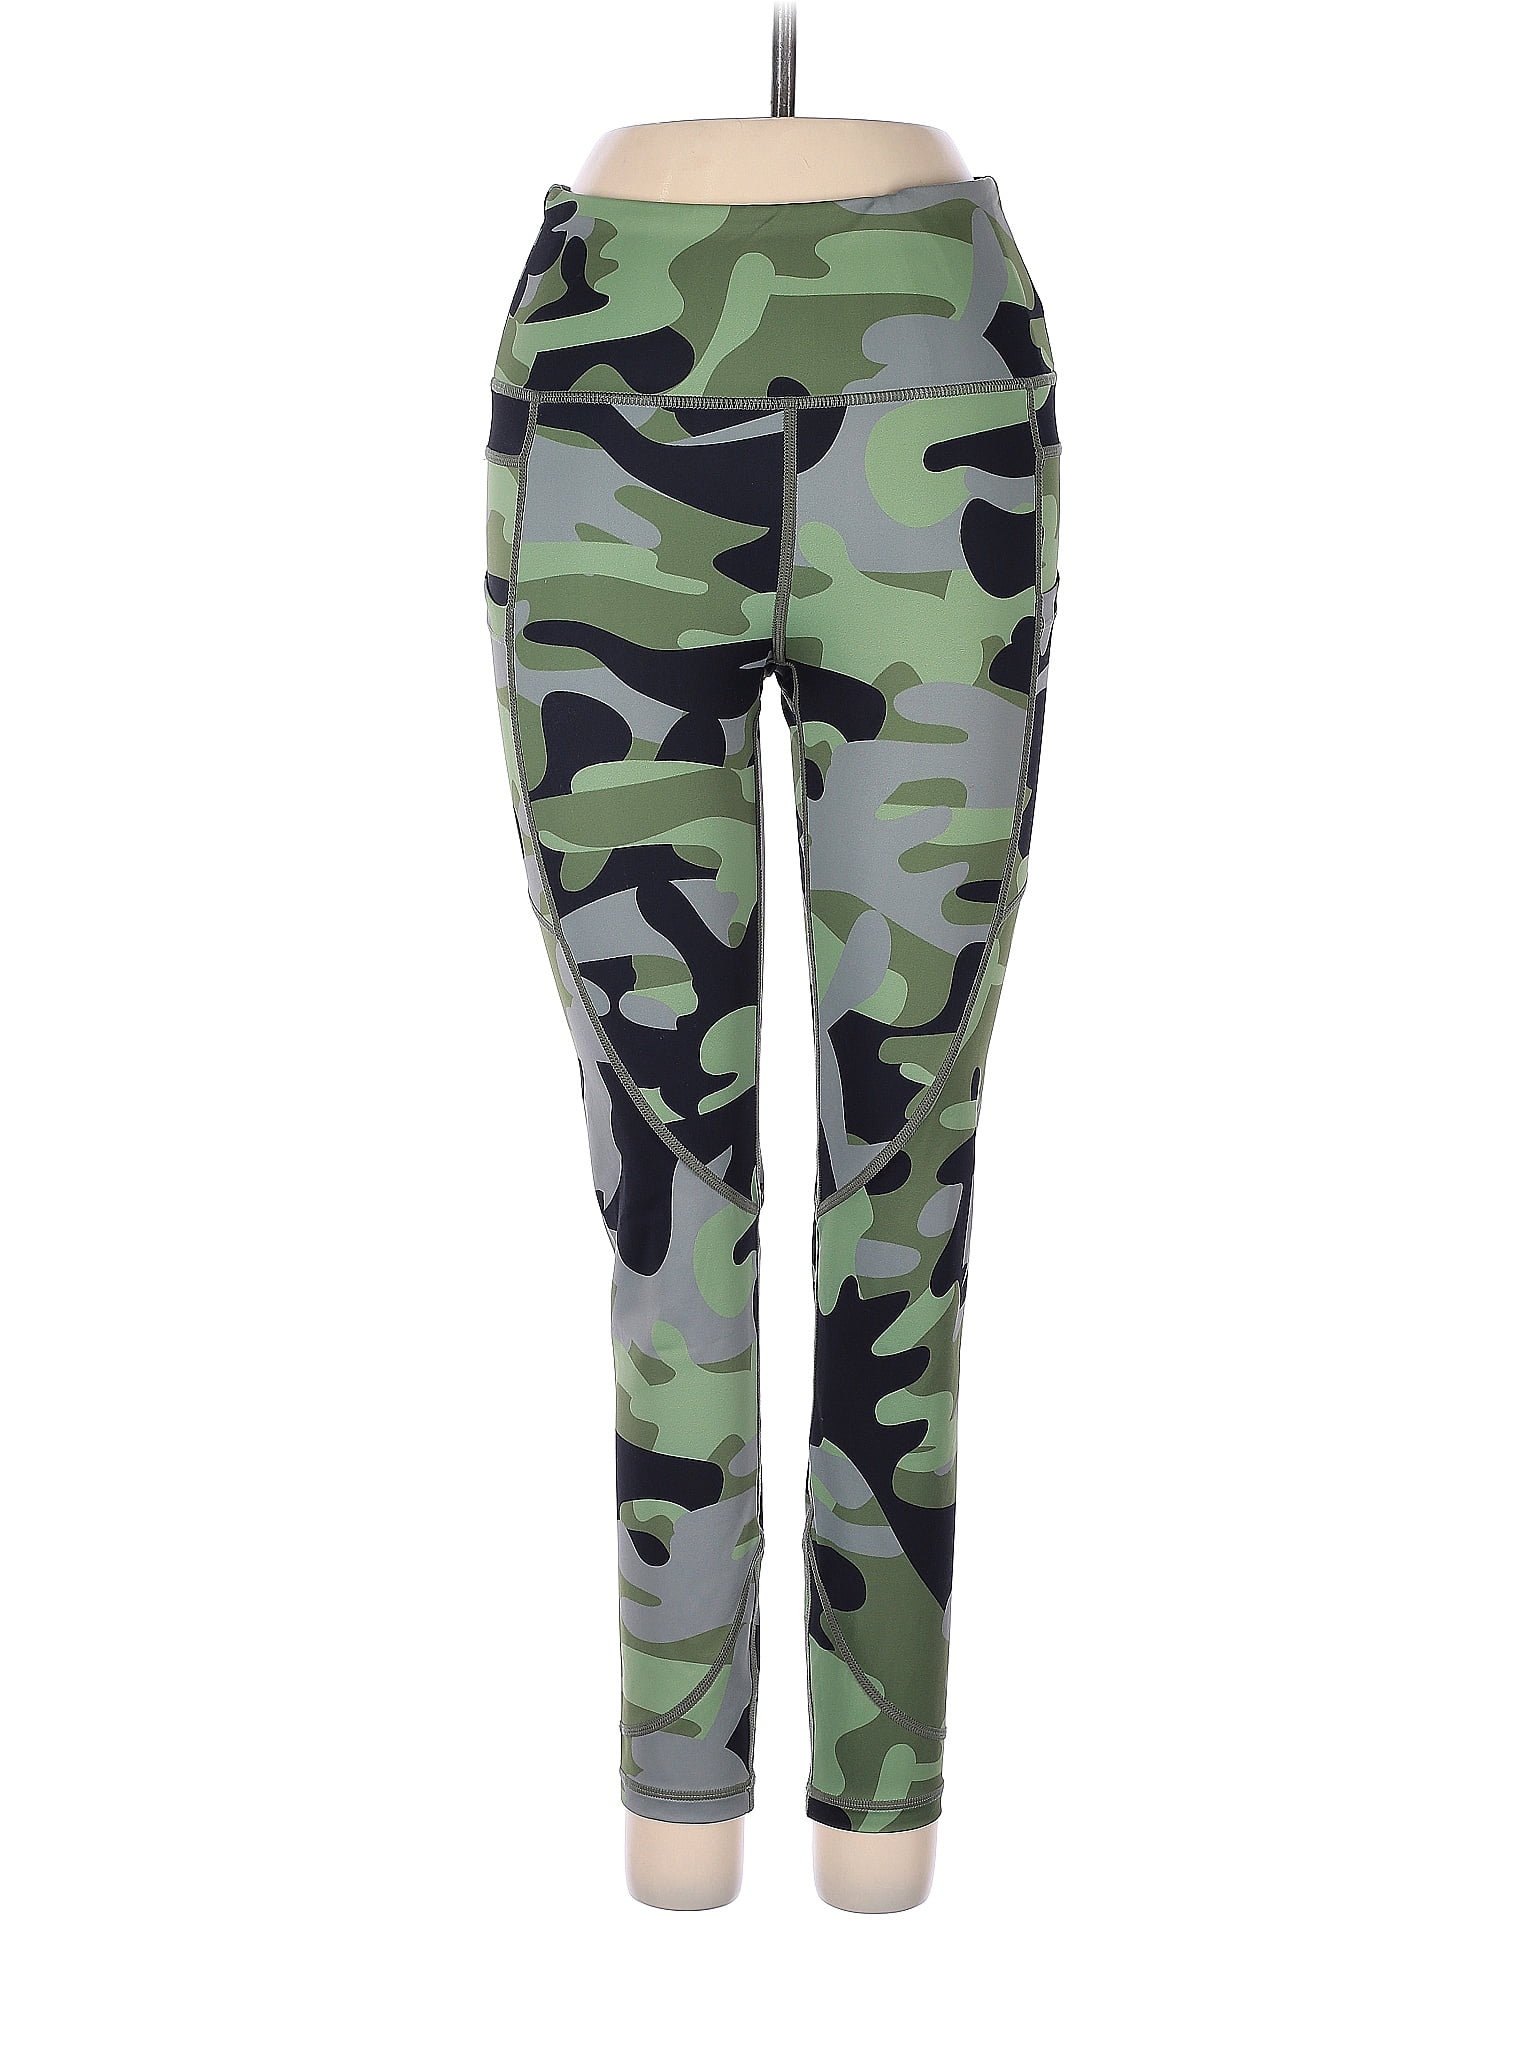 Zyia Active Green Active Pants Size 4 - 59% off